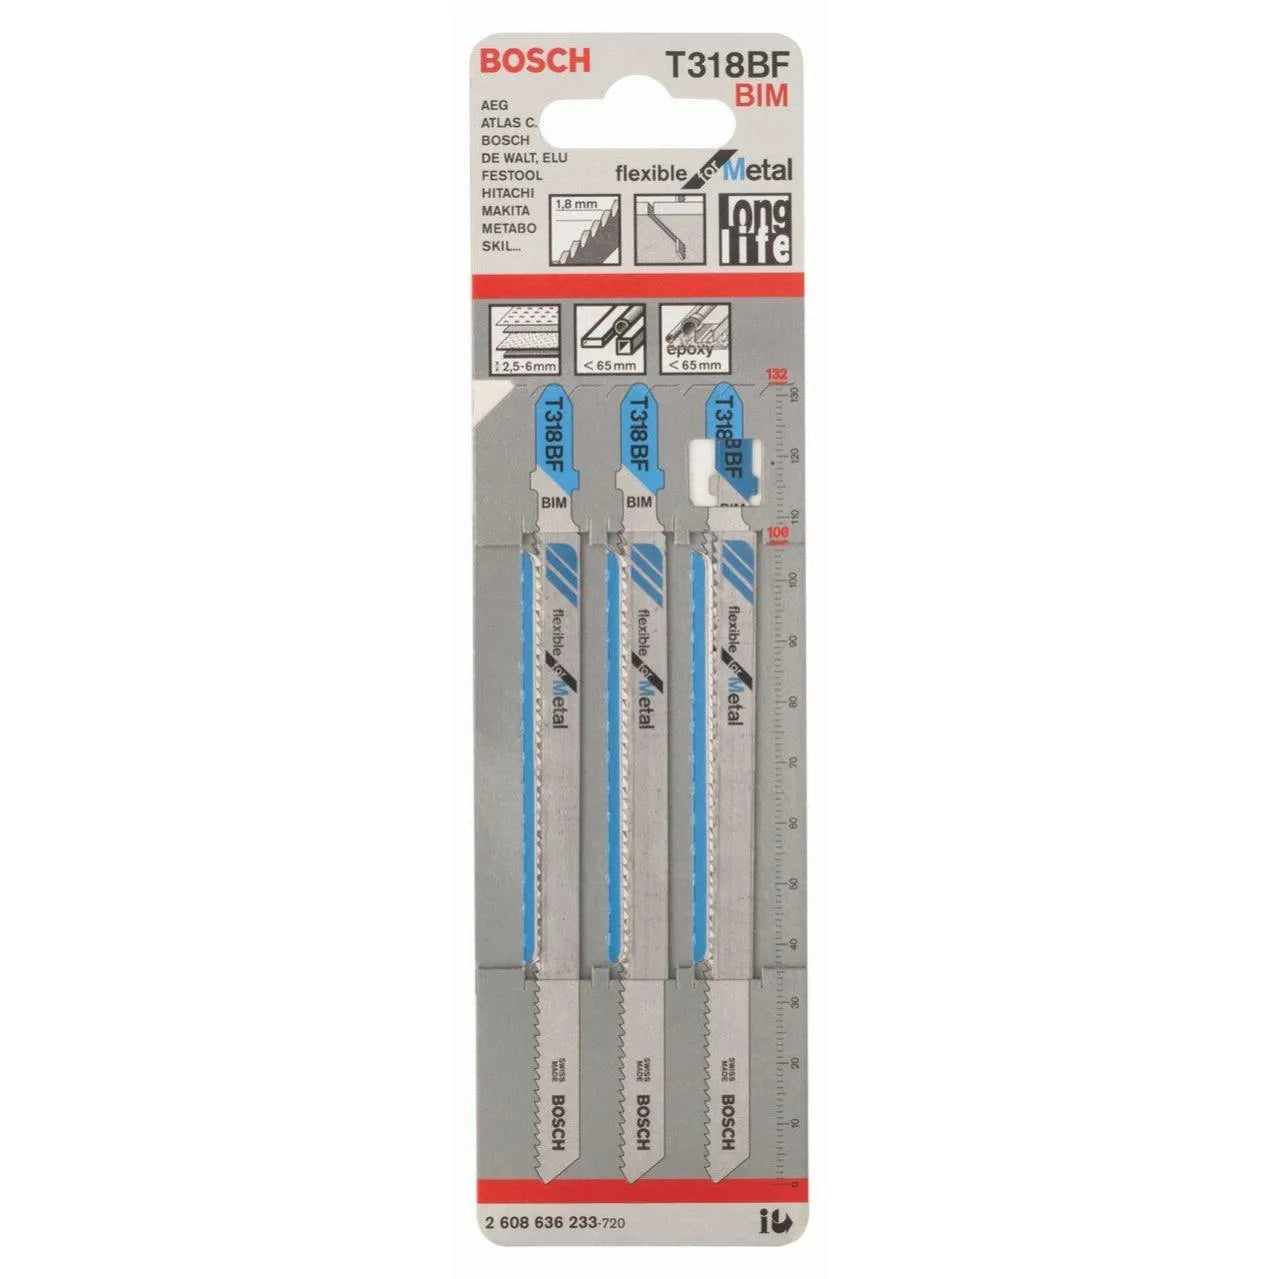 Bosch Jigsaw Blades T 318 BF Flexible for Metal 3 Pack 2608636233 Power Tool Services